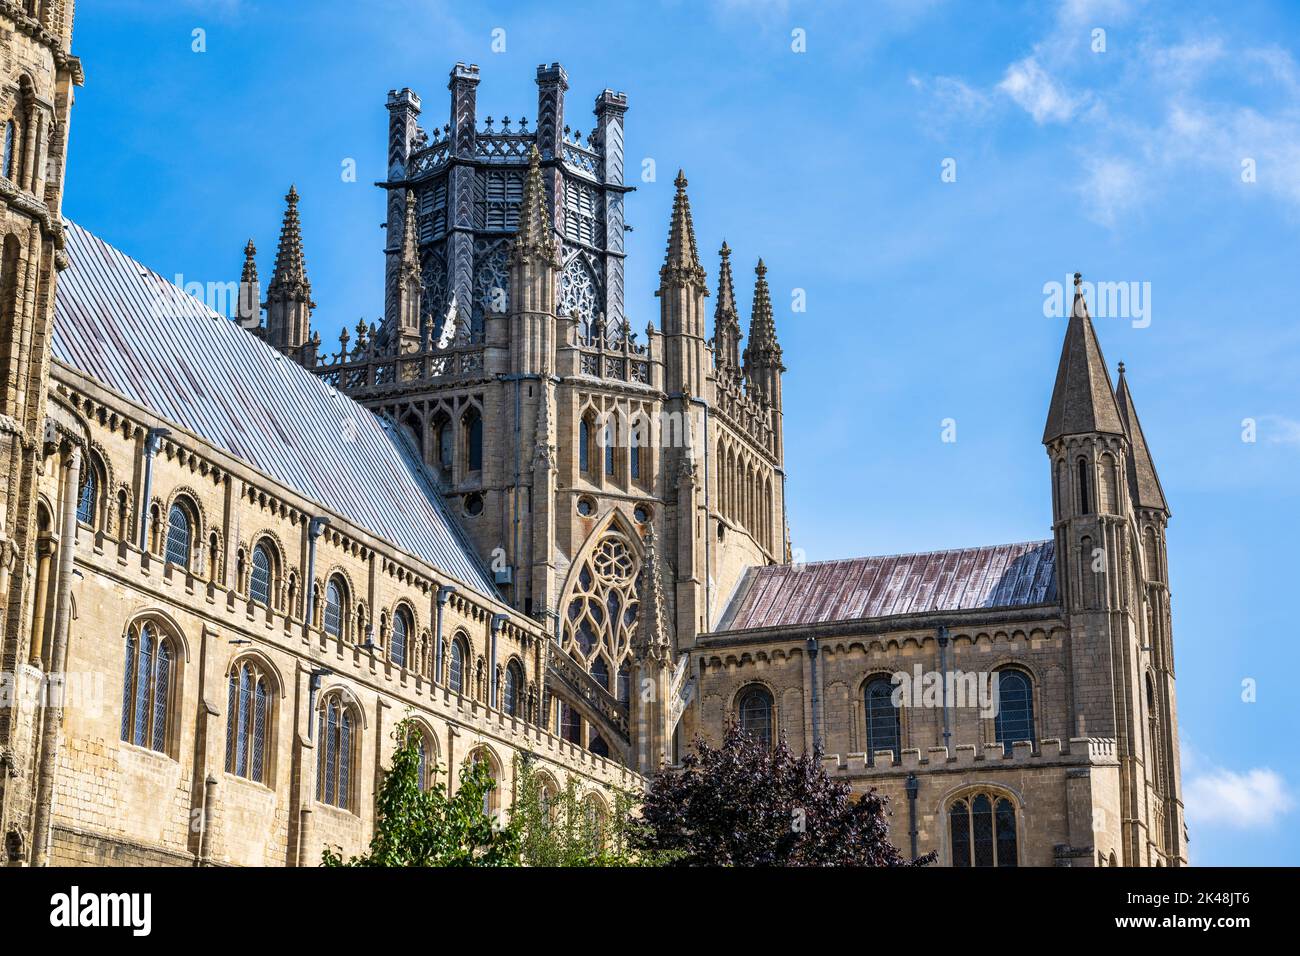 Central octagonal tower and south elevation of Ely Cathedral in Ely, Cambridgeshire, England, UK Stock Photo